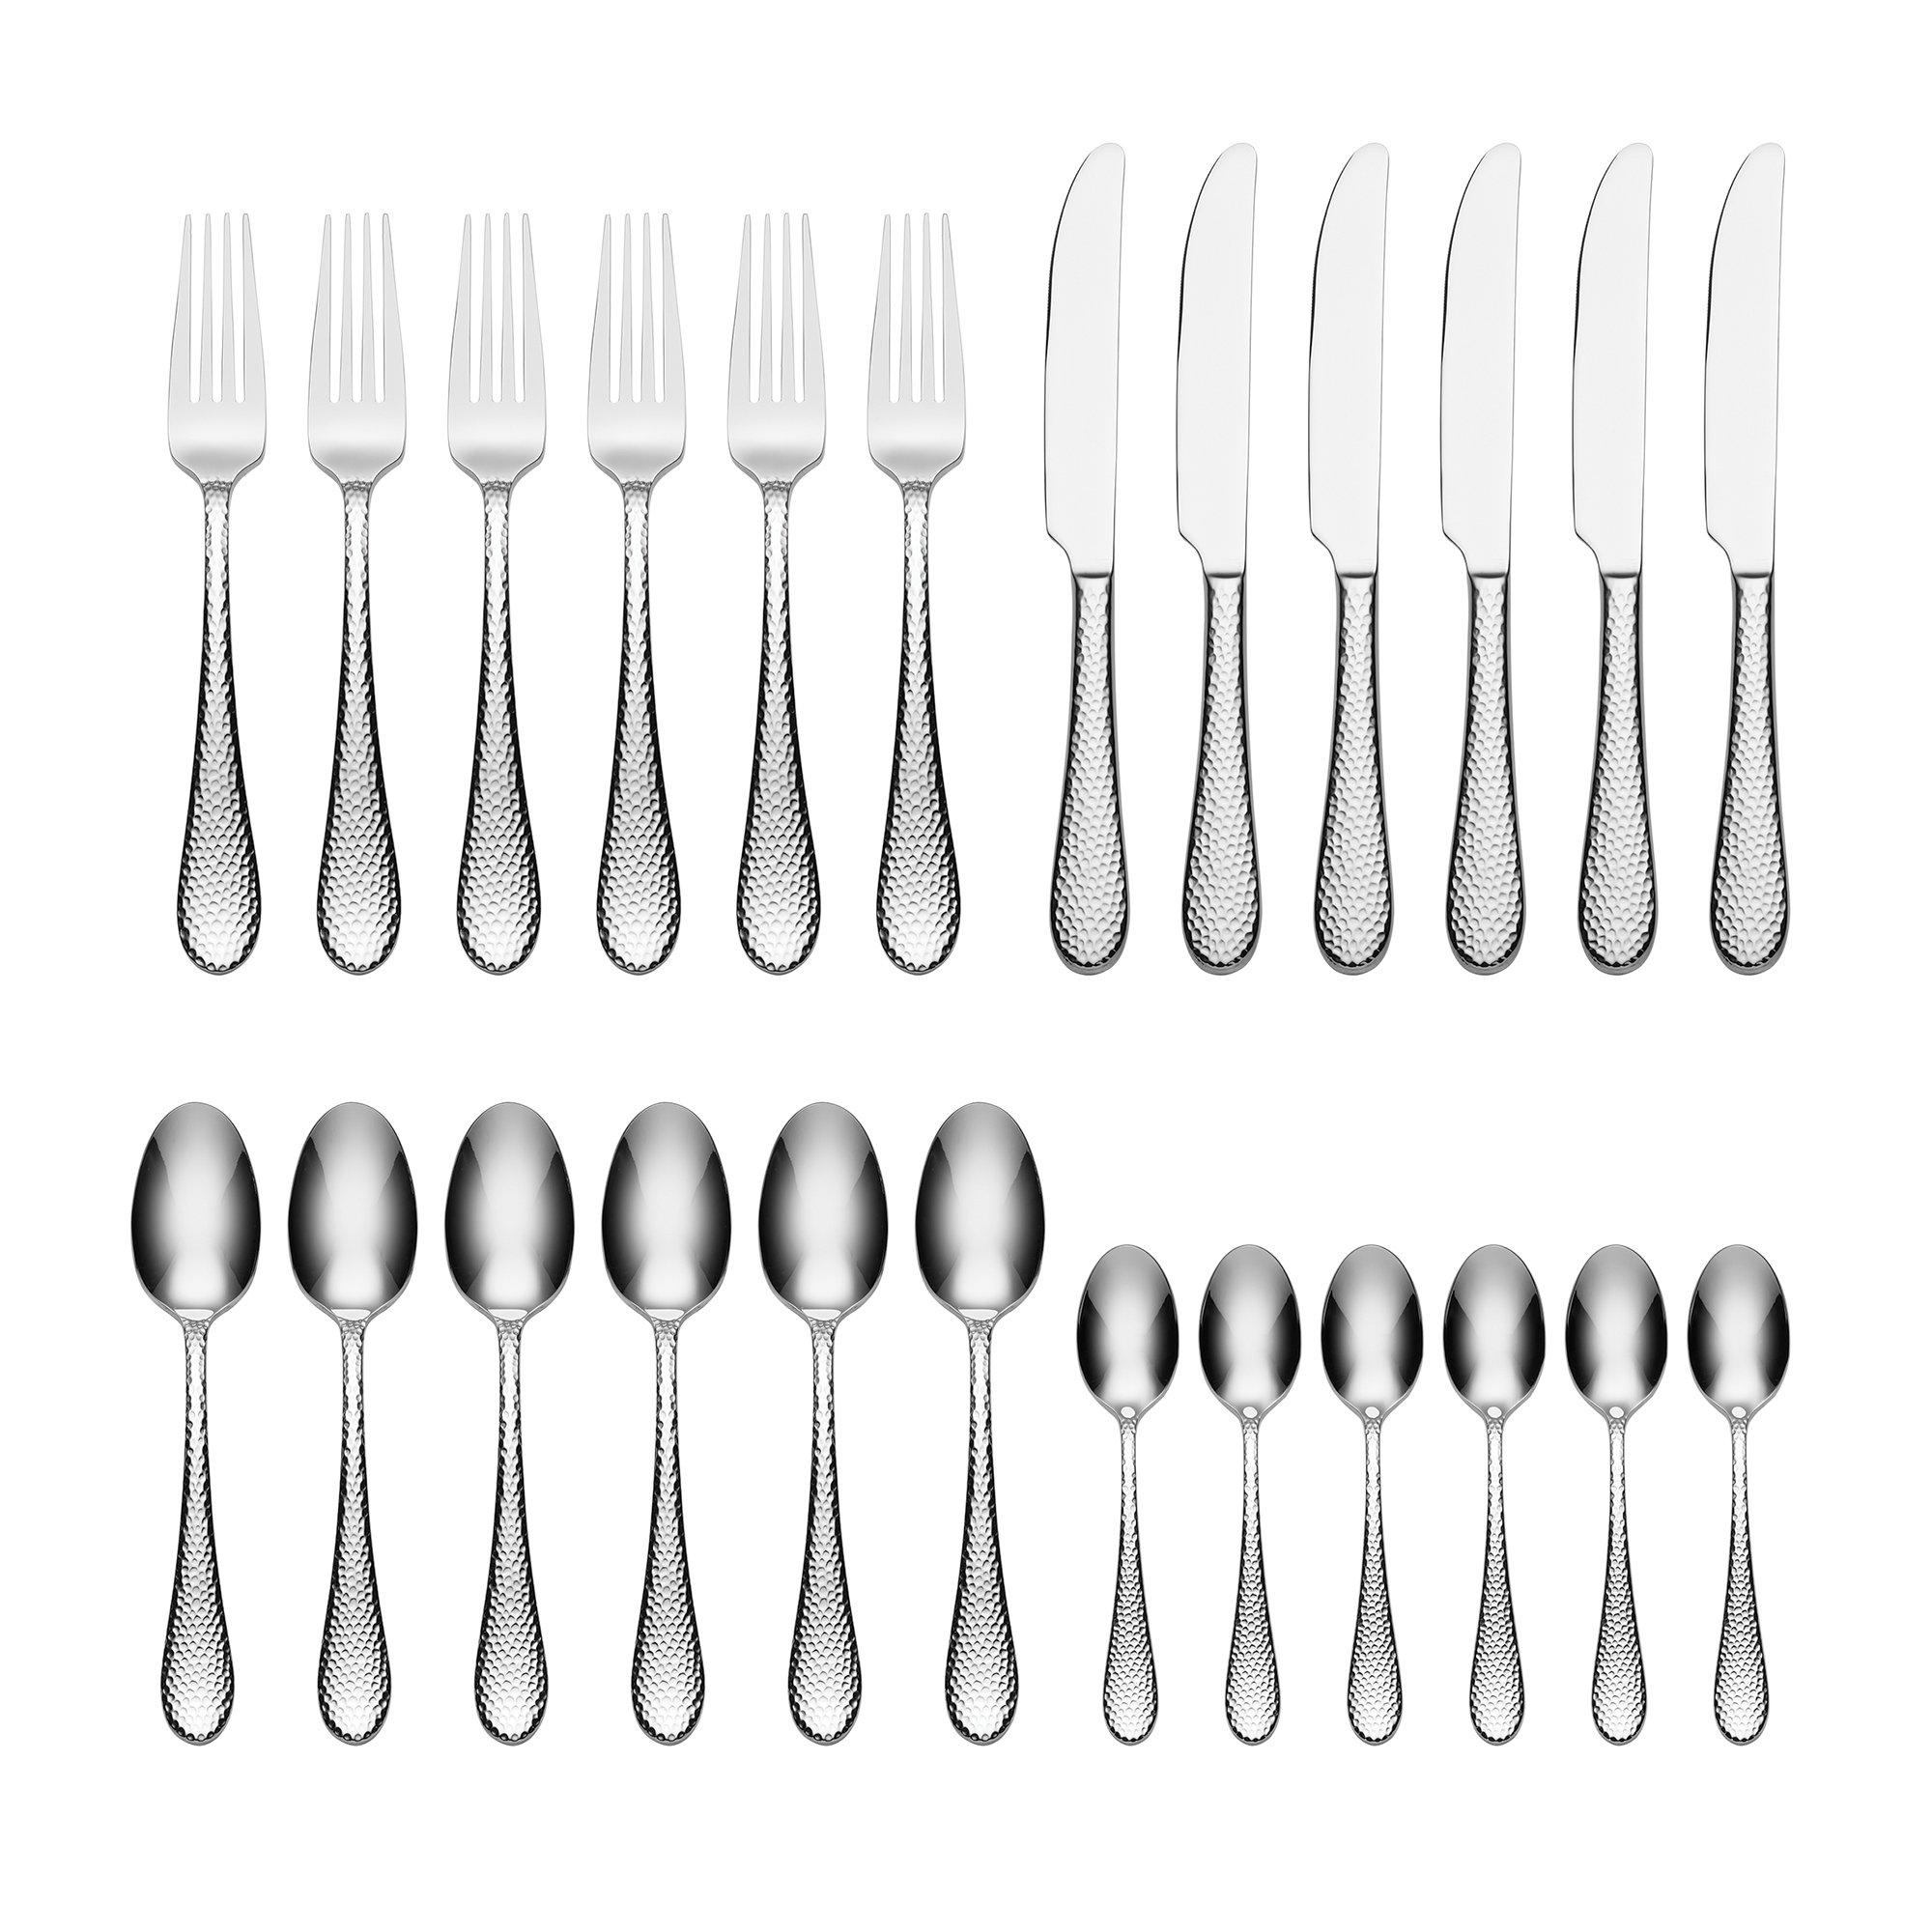 Tibet Hammered Stainless Steel Cutlery Set For 6 People, Dishwasher Safe, Rust Resistant, 24 Piece